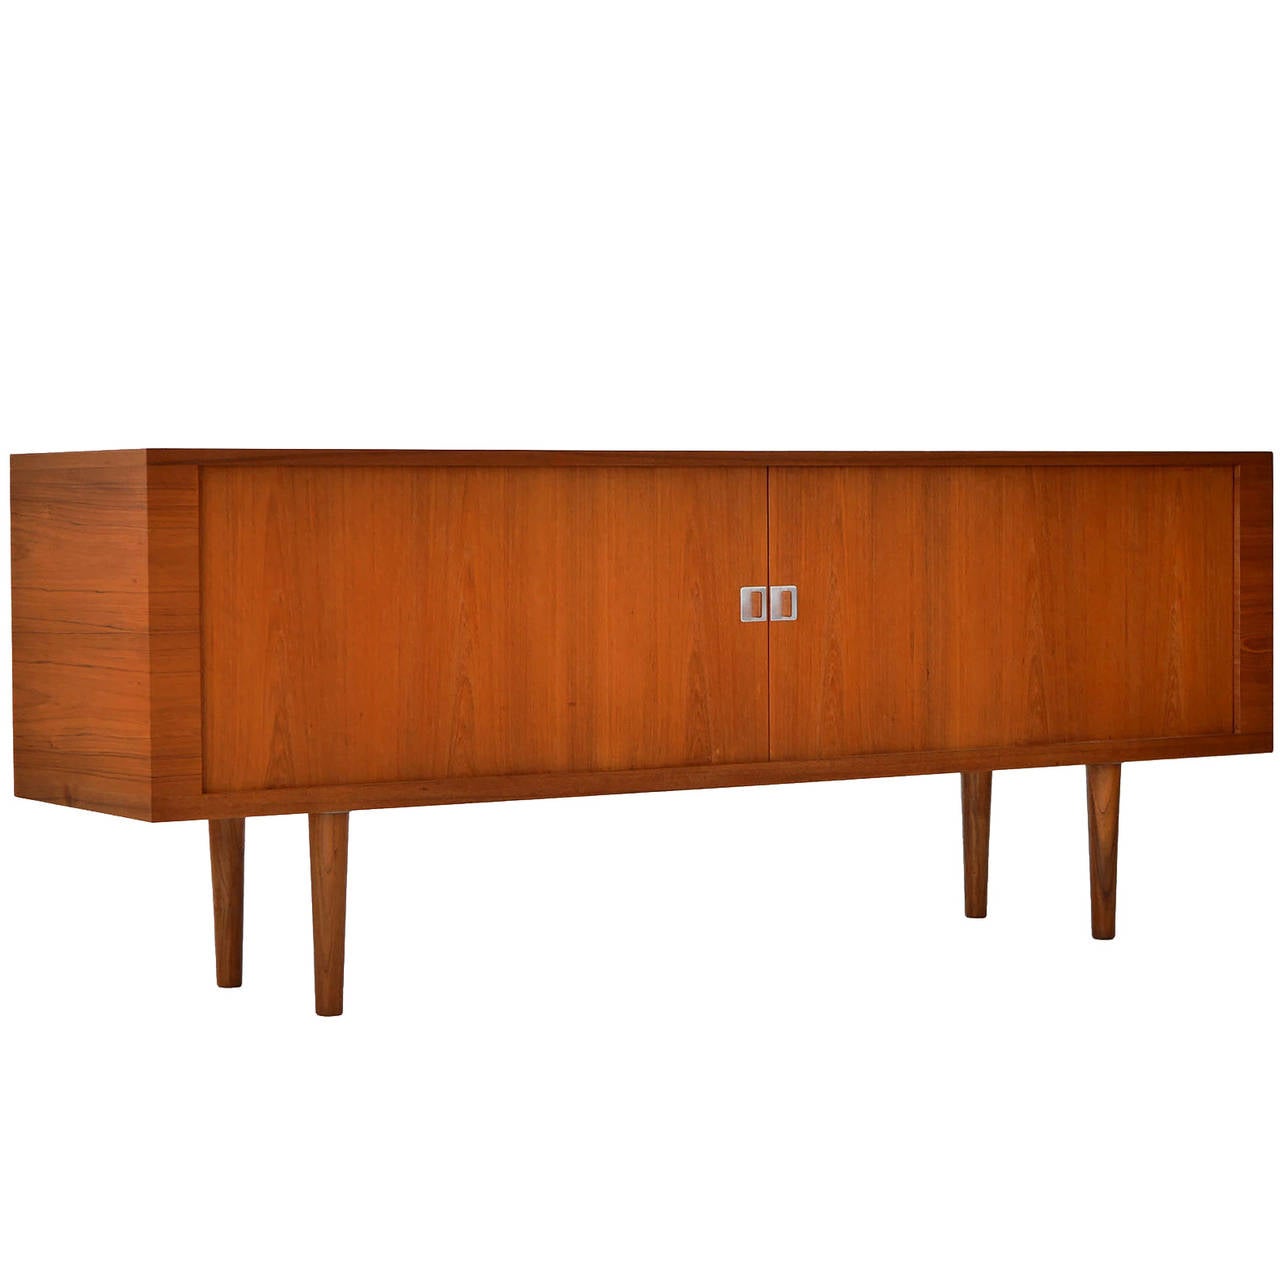 Iconic Hans Wegner credenza in teak. All original hardware, with tambour doors, and adjustable drawers and shelves.